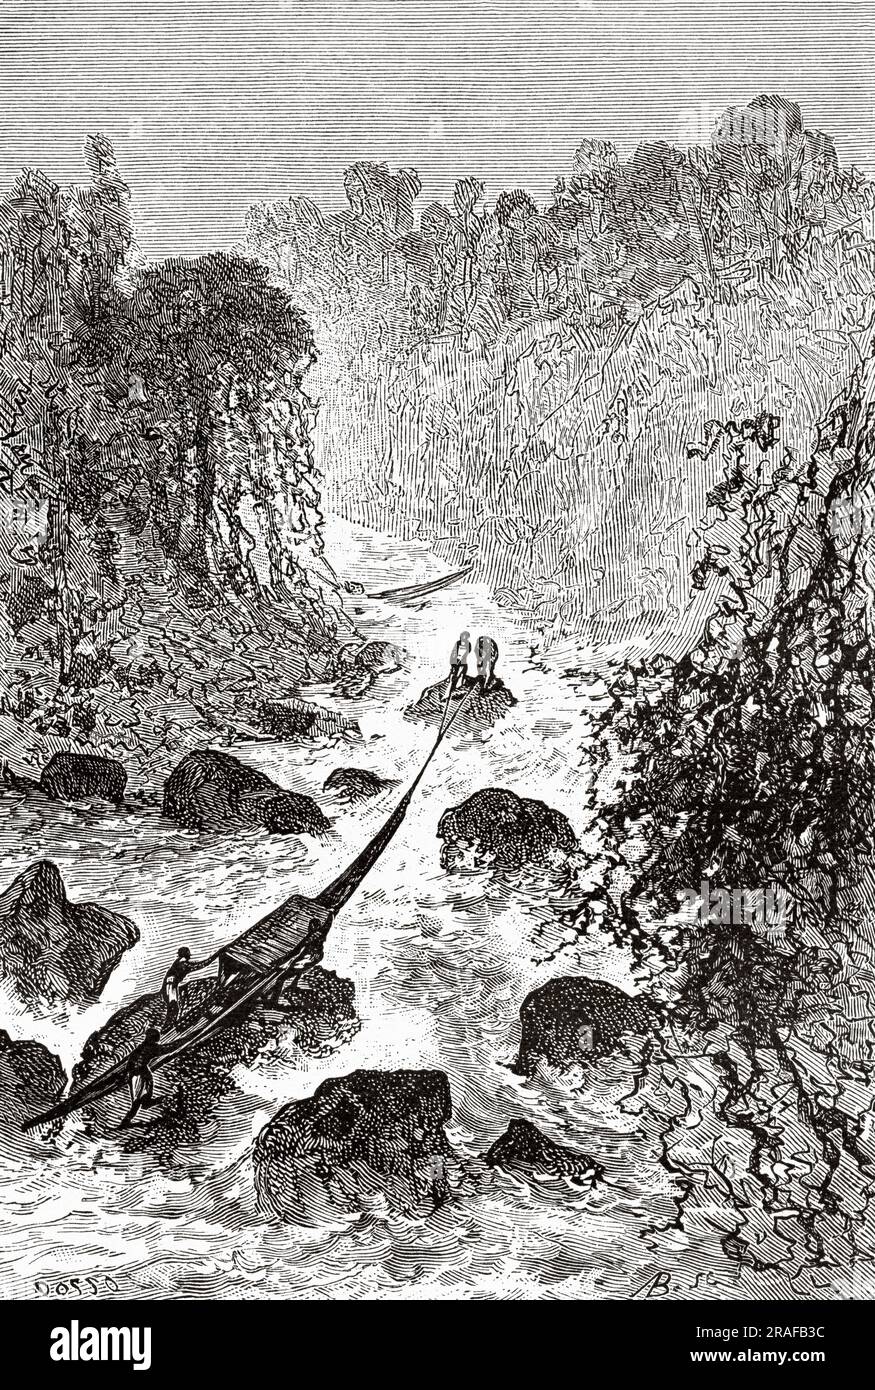 A rapid on the Sahug river, Mindanao, Philippines island. Indonesia. Journey to the Philippines and Malaysia by Dr. J. Montano 1879-1881. Old 19th century engraving from Le Tour du Monde 1906 Stock Photo